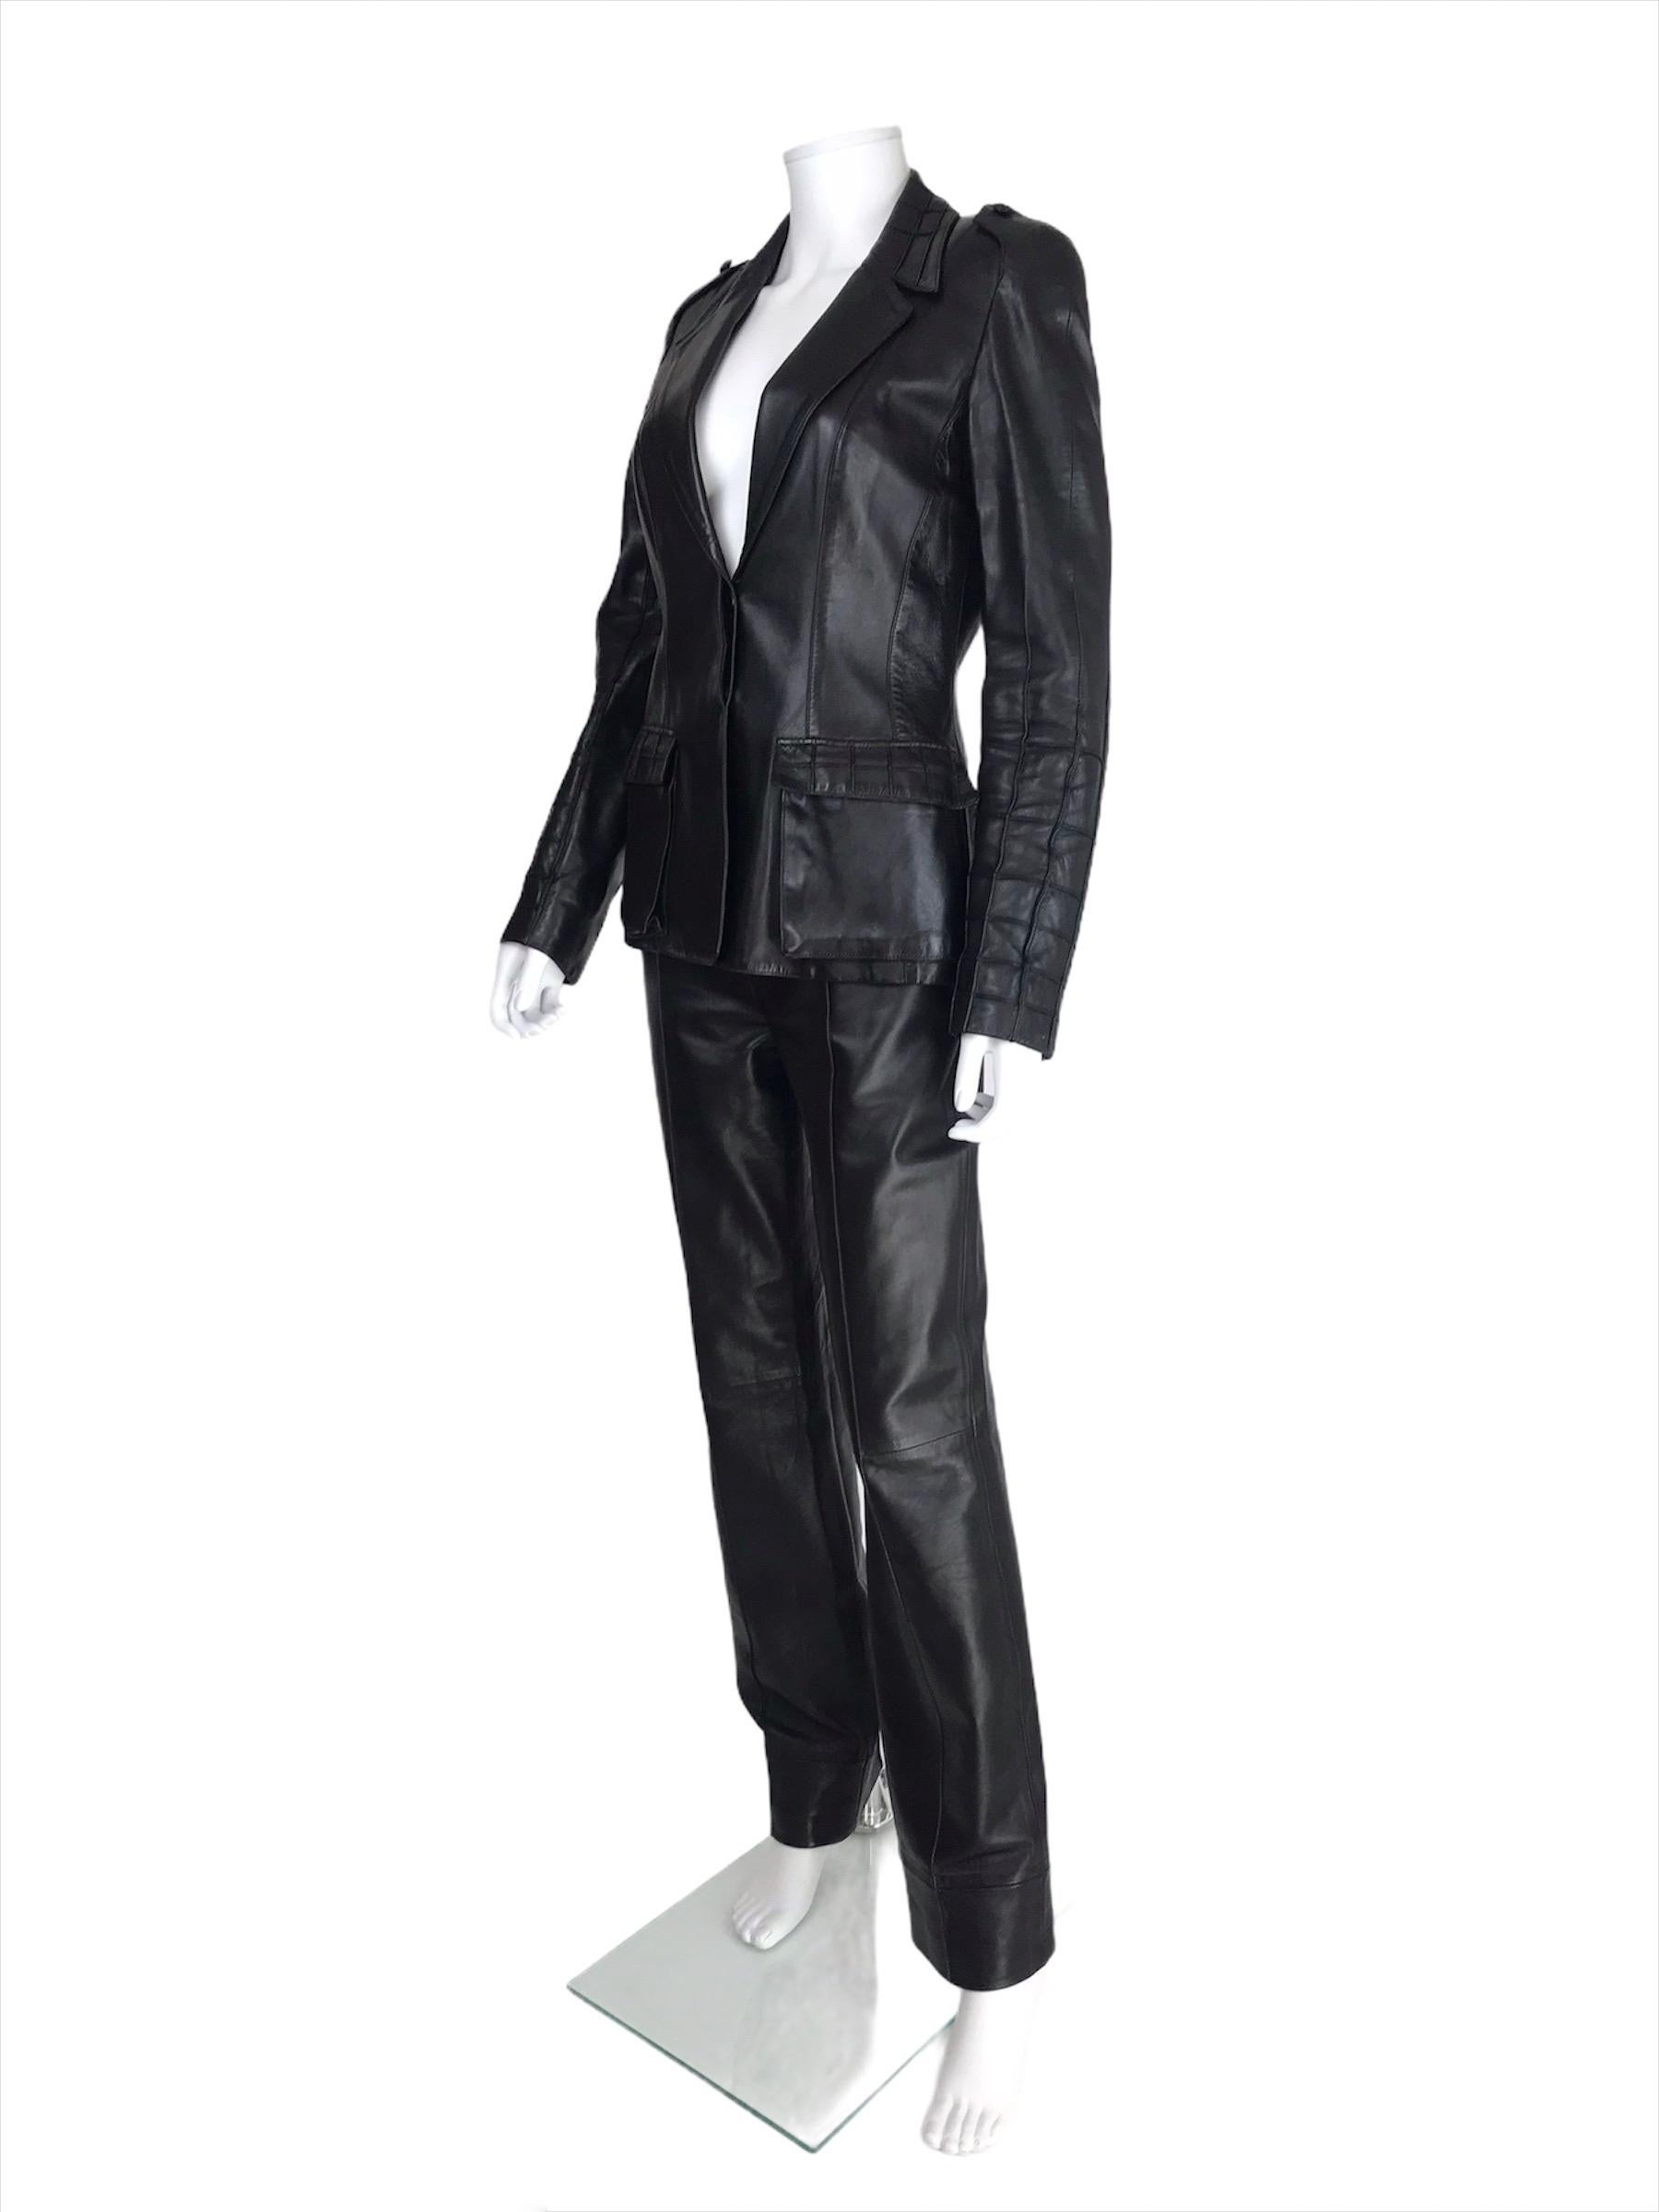 THIERRY MUGLER, Made in France, circa 00’s.

Smooth lambskin leather set composed of a jacket and pants. Both lined. 
The jacket is fitted and closes with 2 hidden buttons on the front. 
The pants are straight and closes with a zipper on the side.